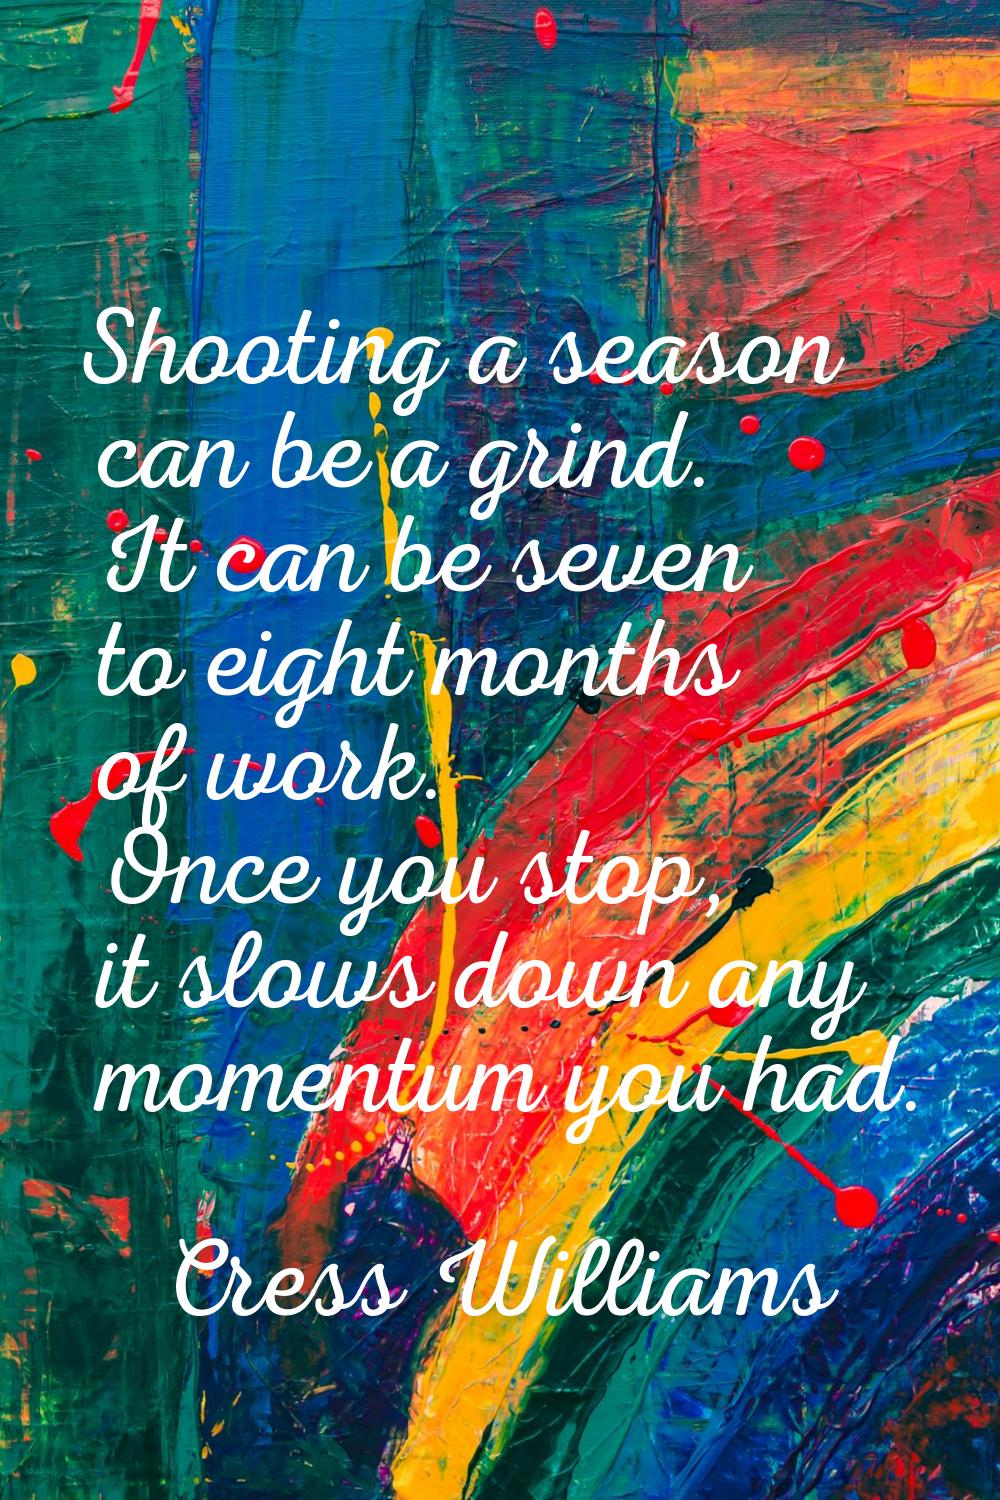 Shooting a season can be a grind. It can be seven to eight months of work. Once you stop, it slows 